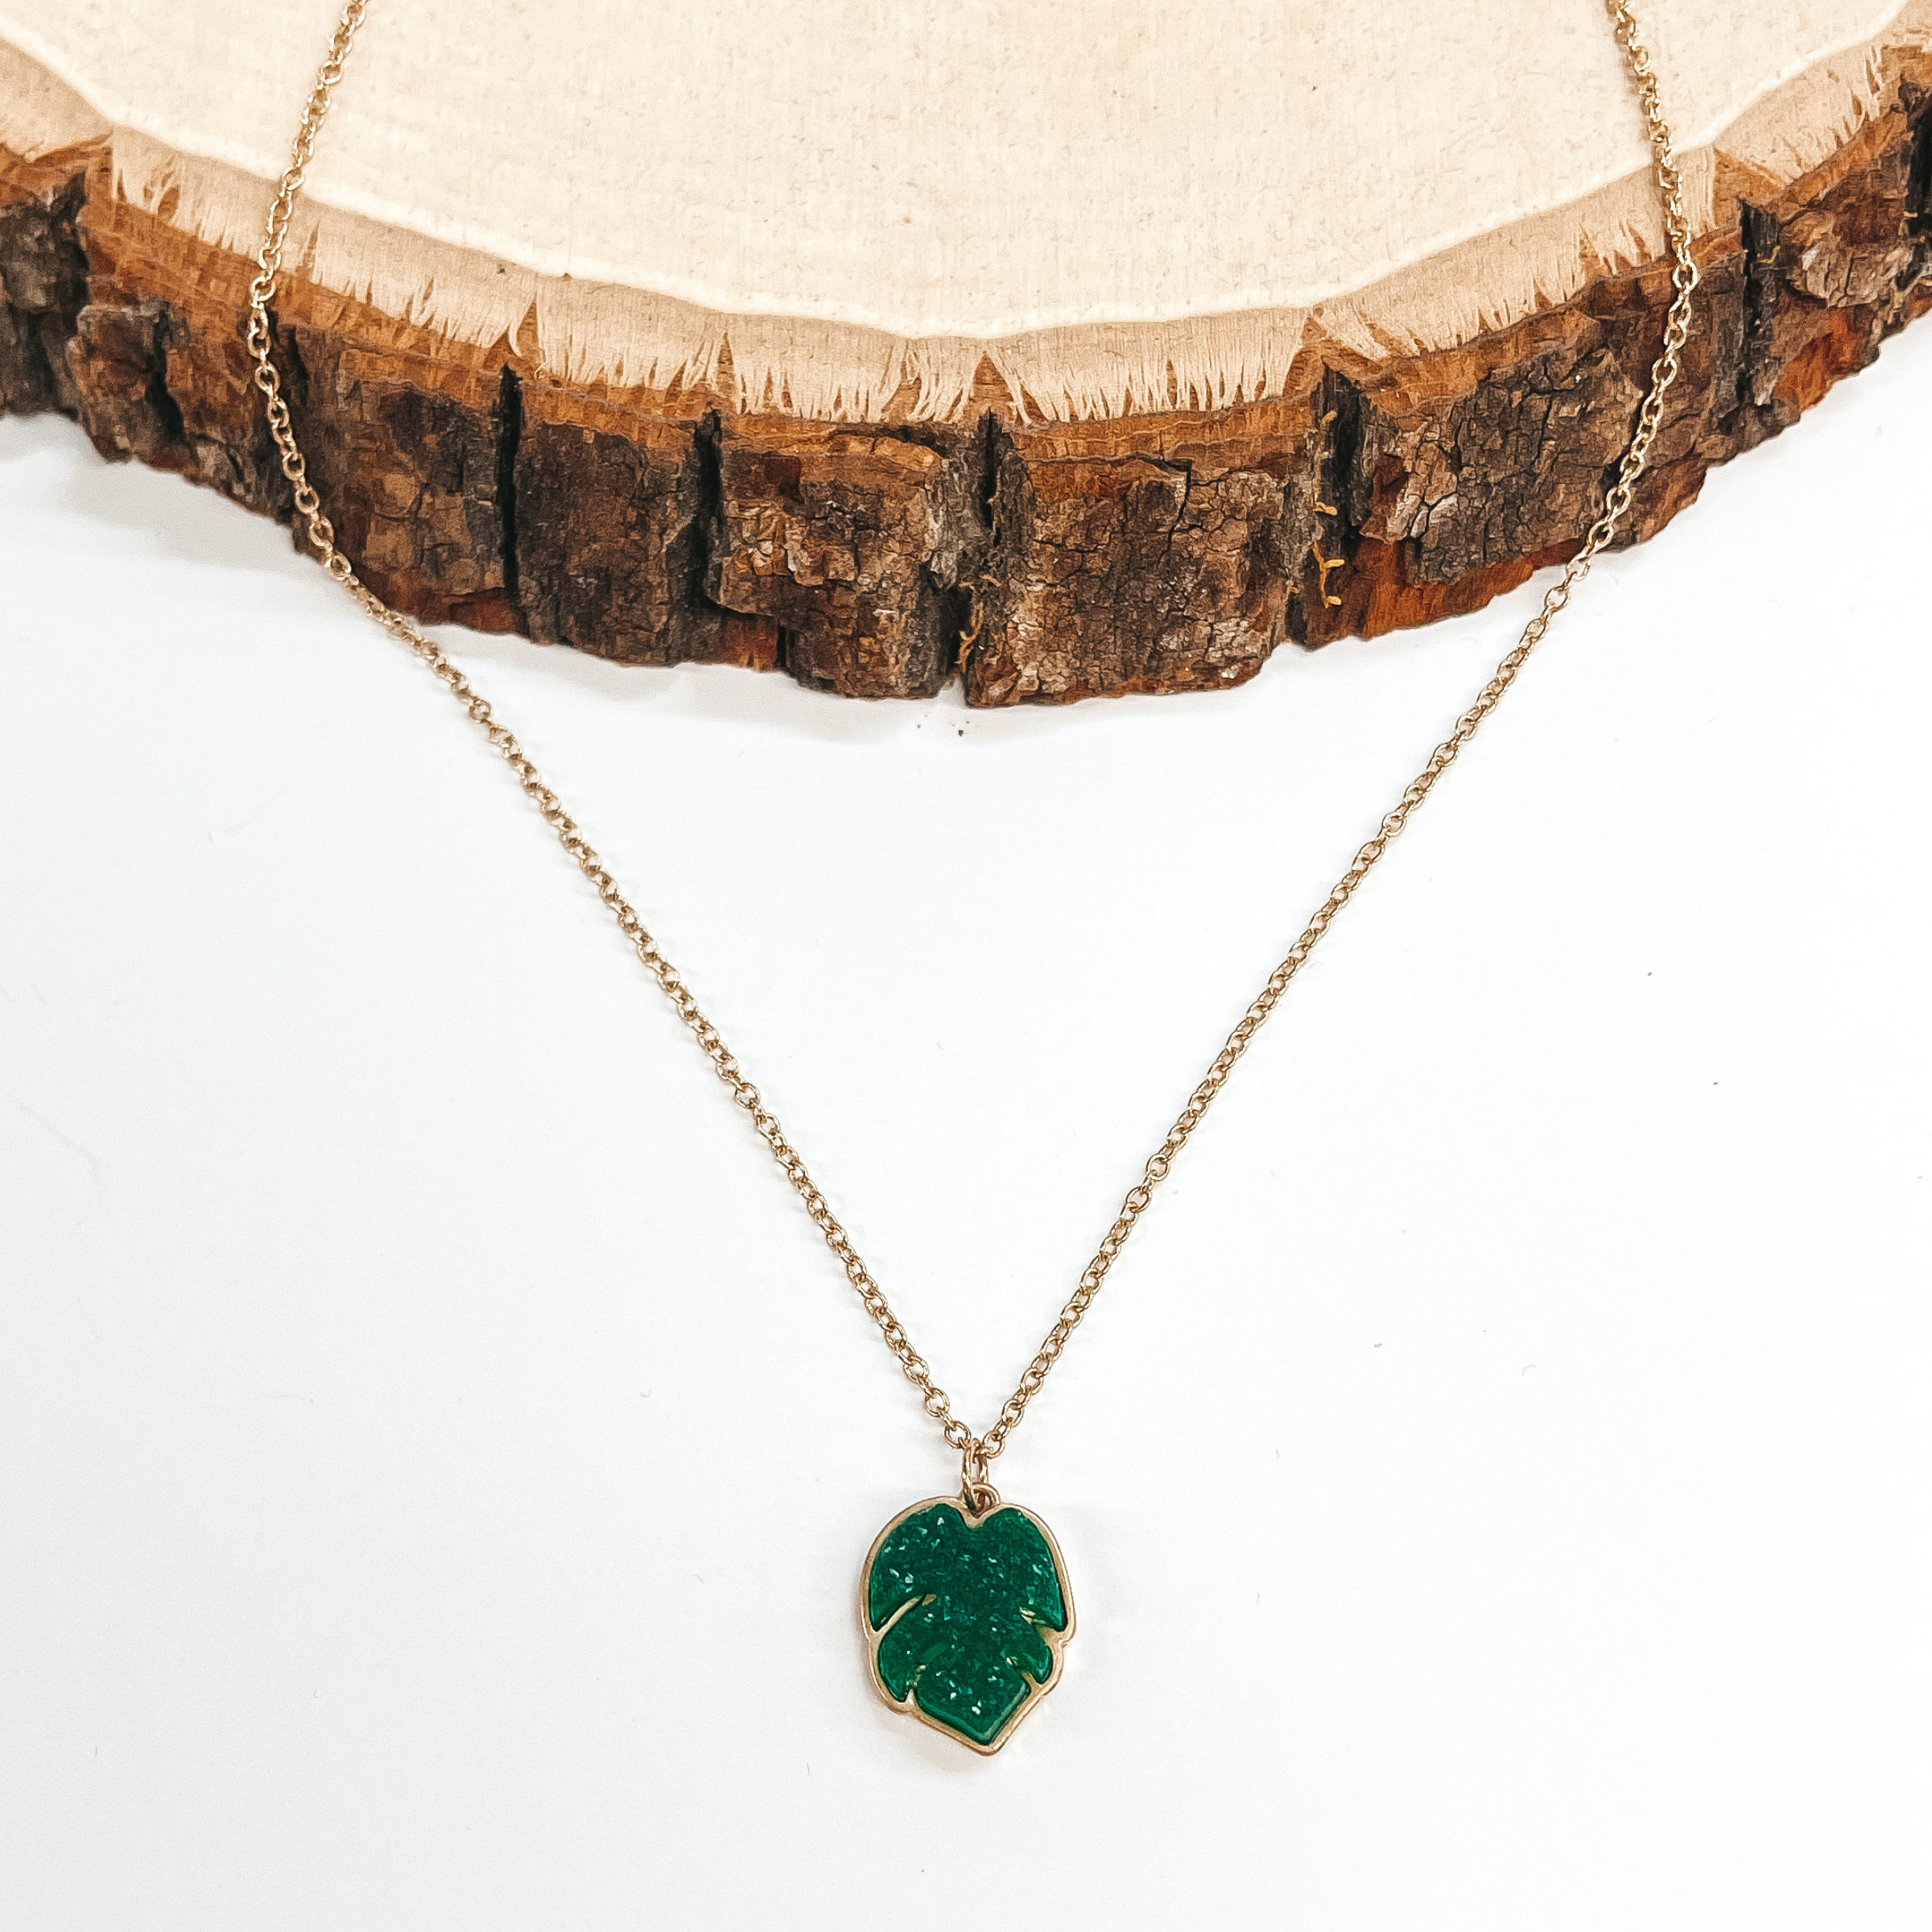 Gold necklace with a palm leaf druzy pendant in  green. Taken on a white background and a piece of  wood. 